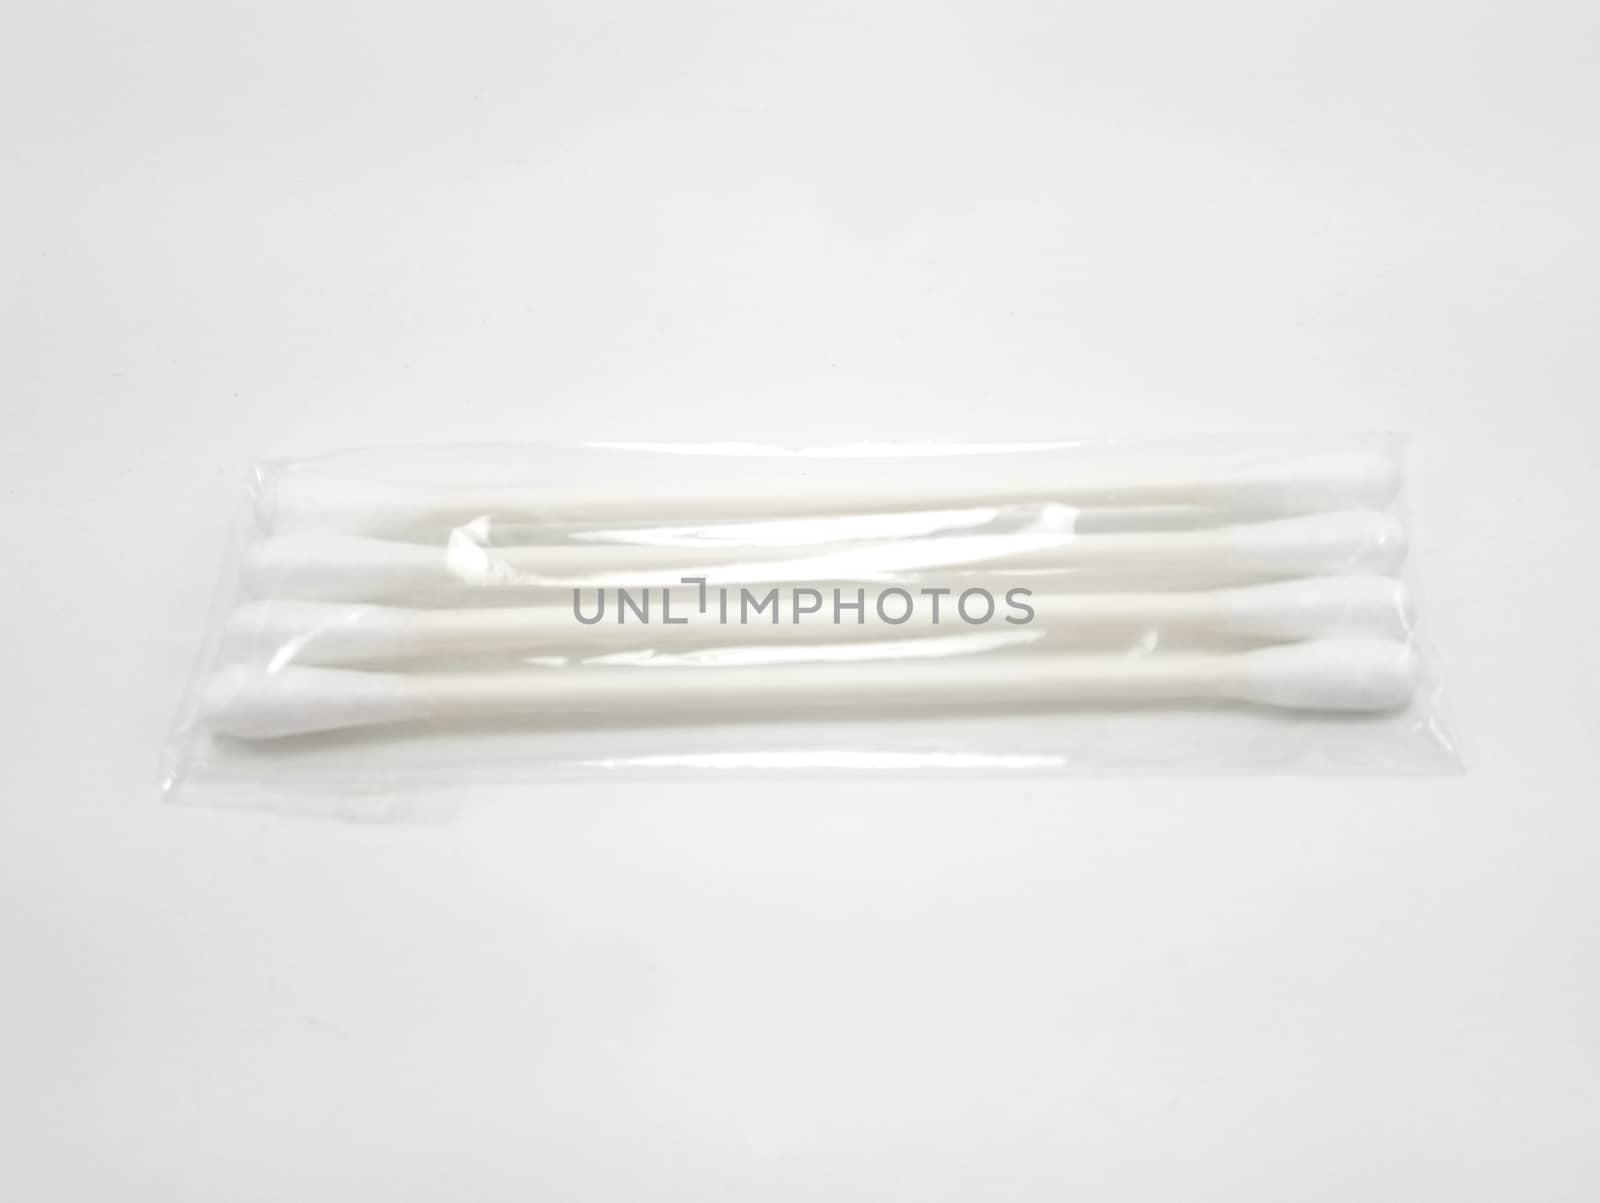 Cotton buds at both ends of the plastic stick by imwaltersy